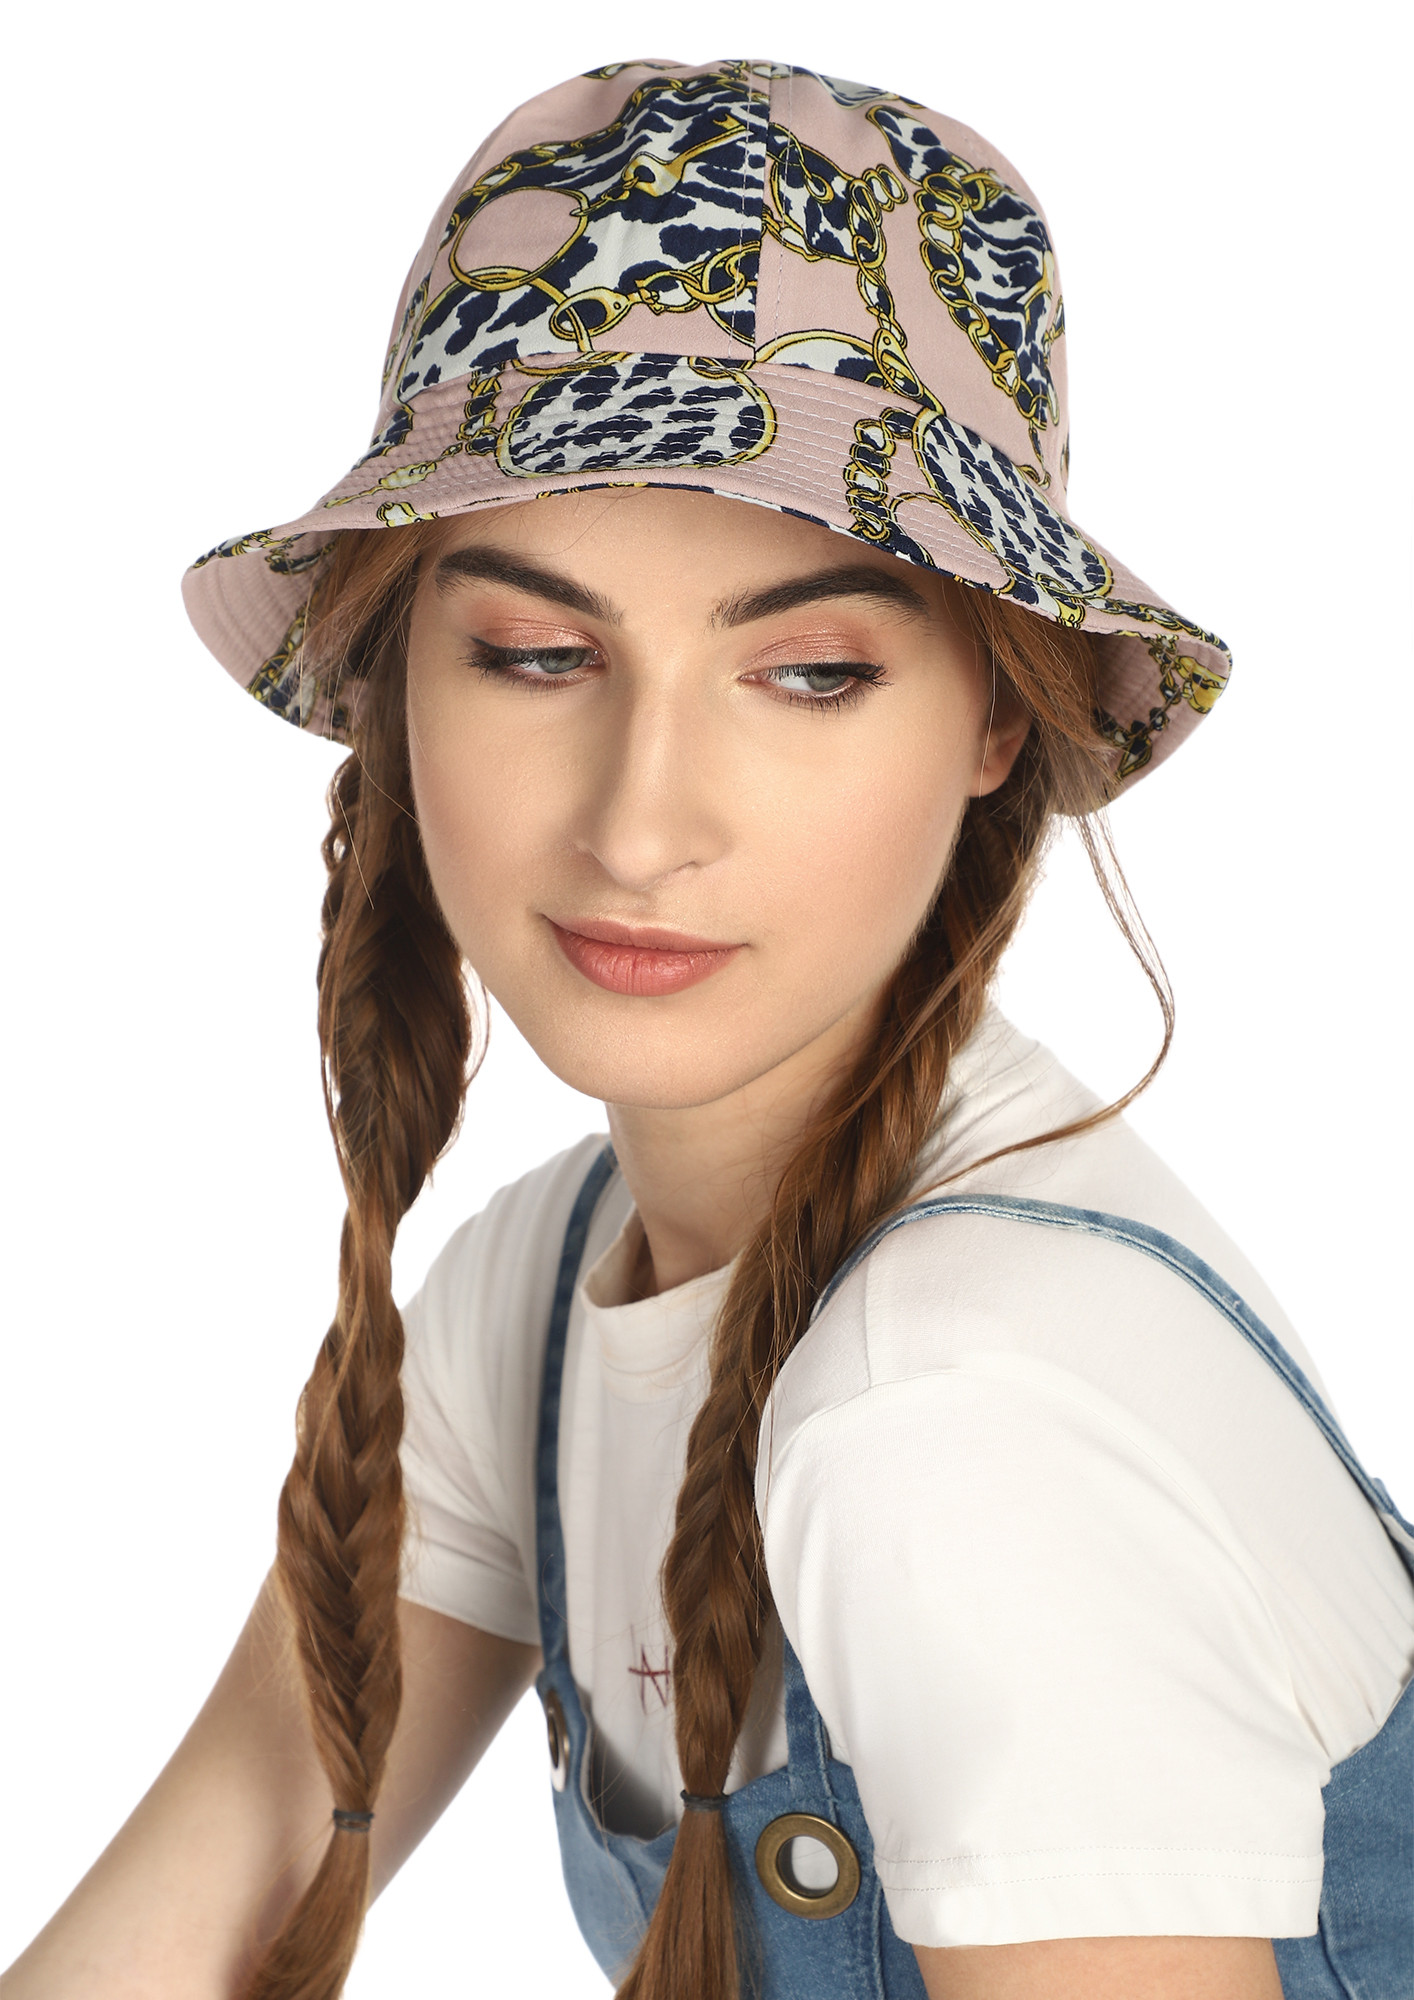 AFTER-BRUNCH CITY STOLL PINK BUCKET HAT